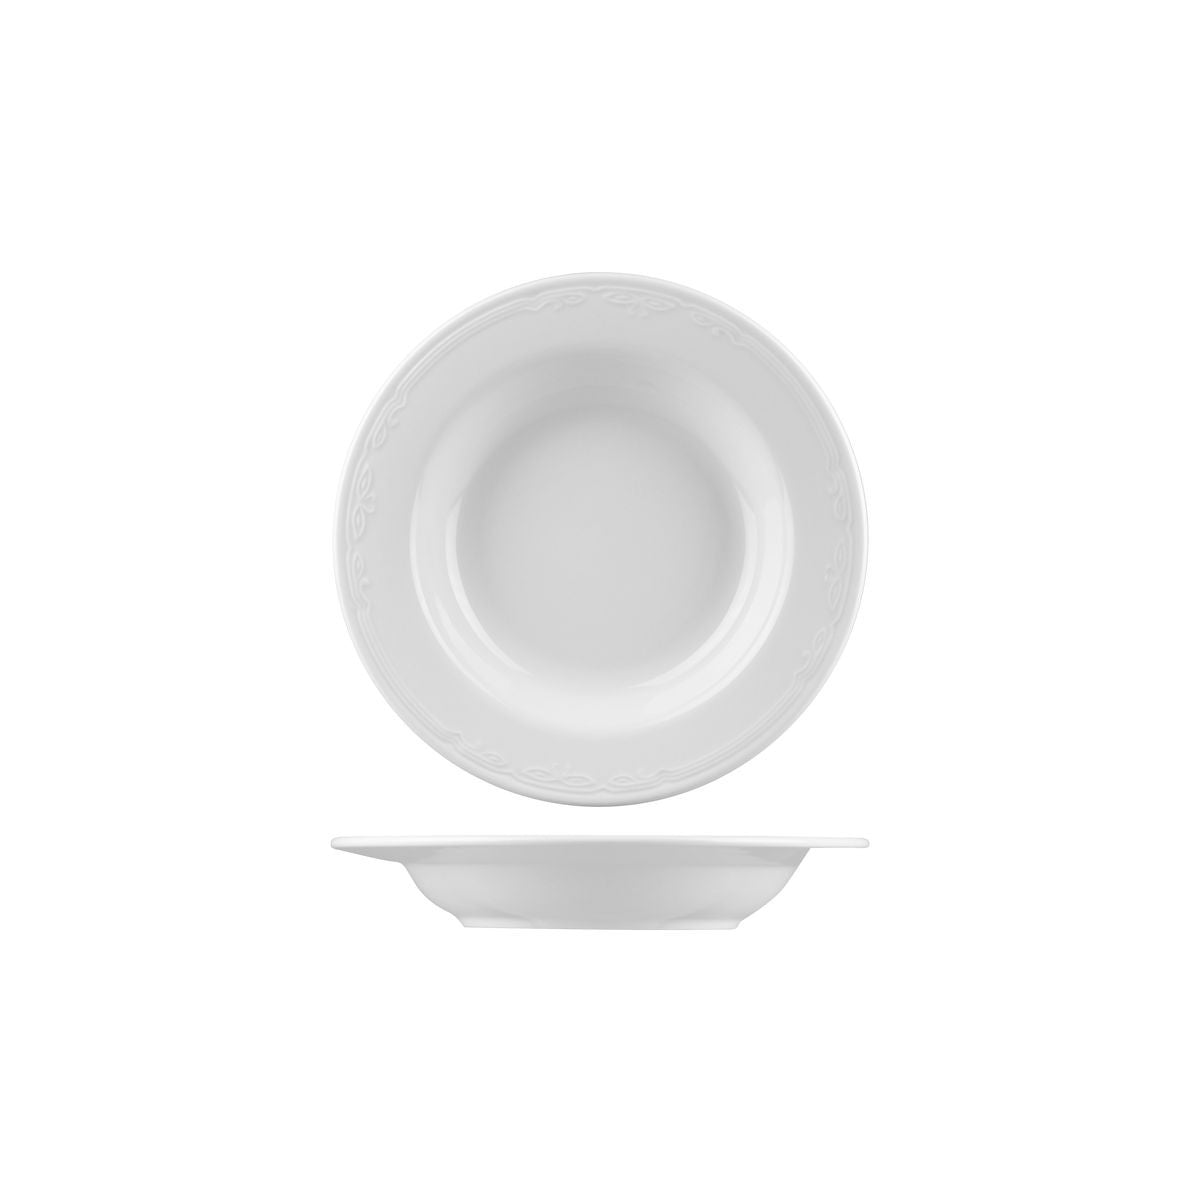 Soup Plate - 220Mm, Renaissance from Australia Fine China. made out of Porcelain and sold in boxes of 24. Hospitality quality at wholesale price with The Flying Fork! 